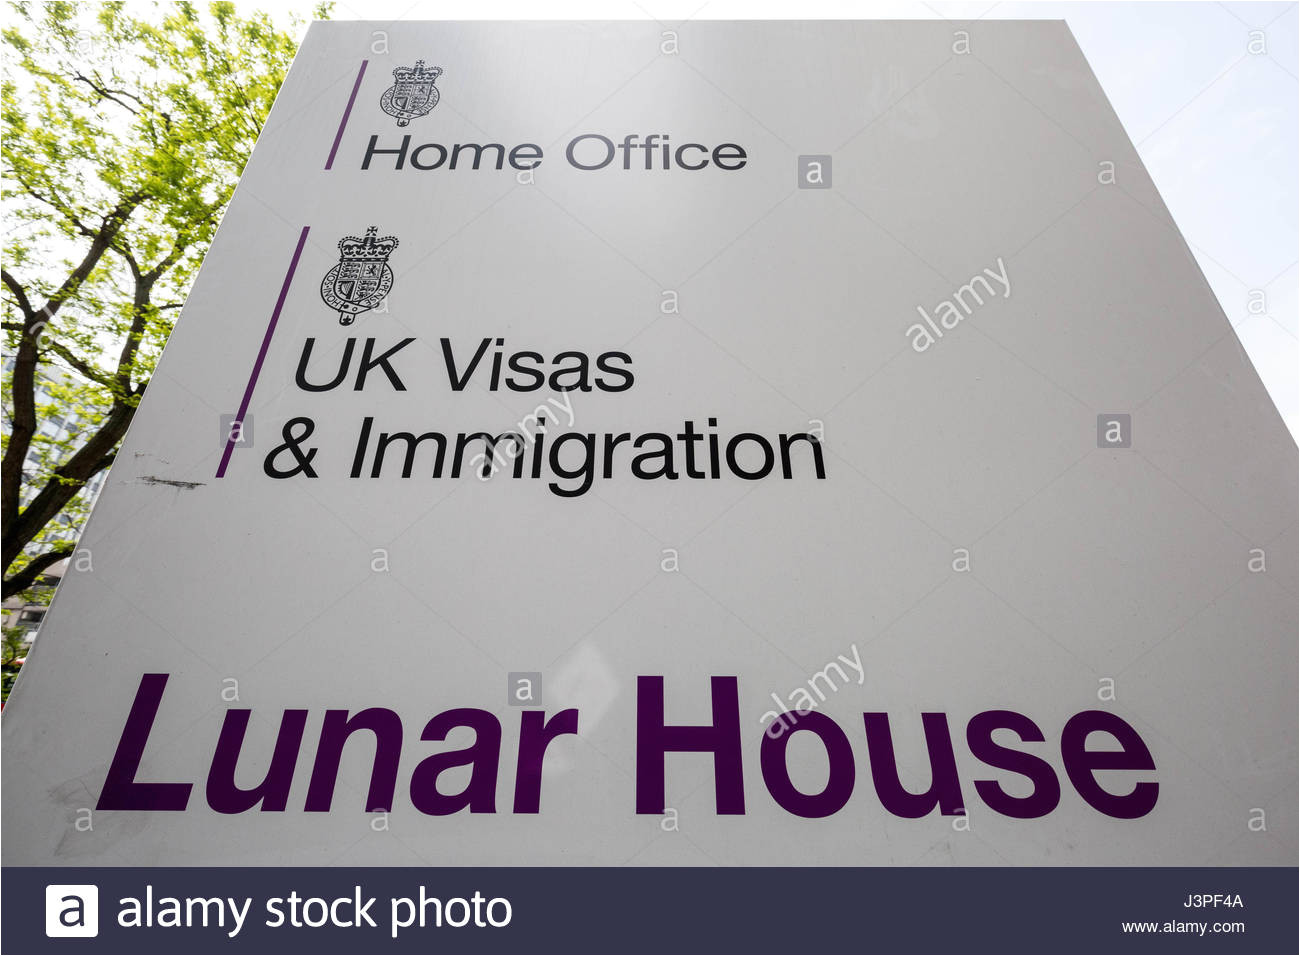 the home office uk visas immigration office at lunar house in croydon j3pf4a jpg